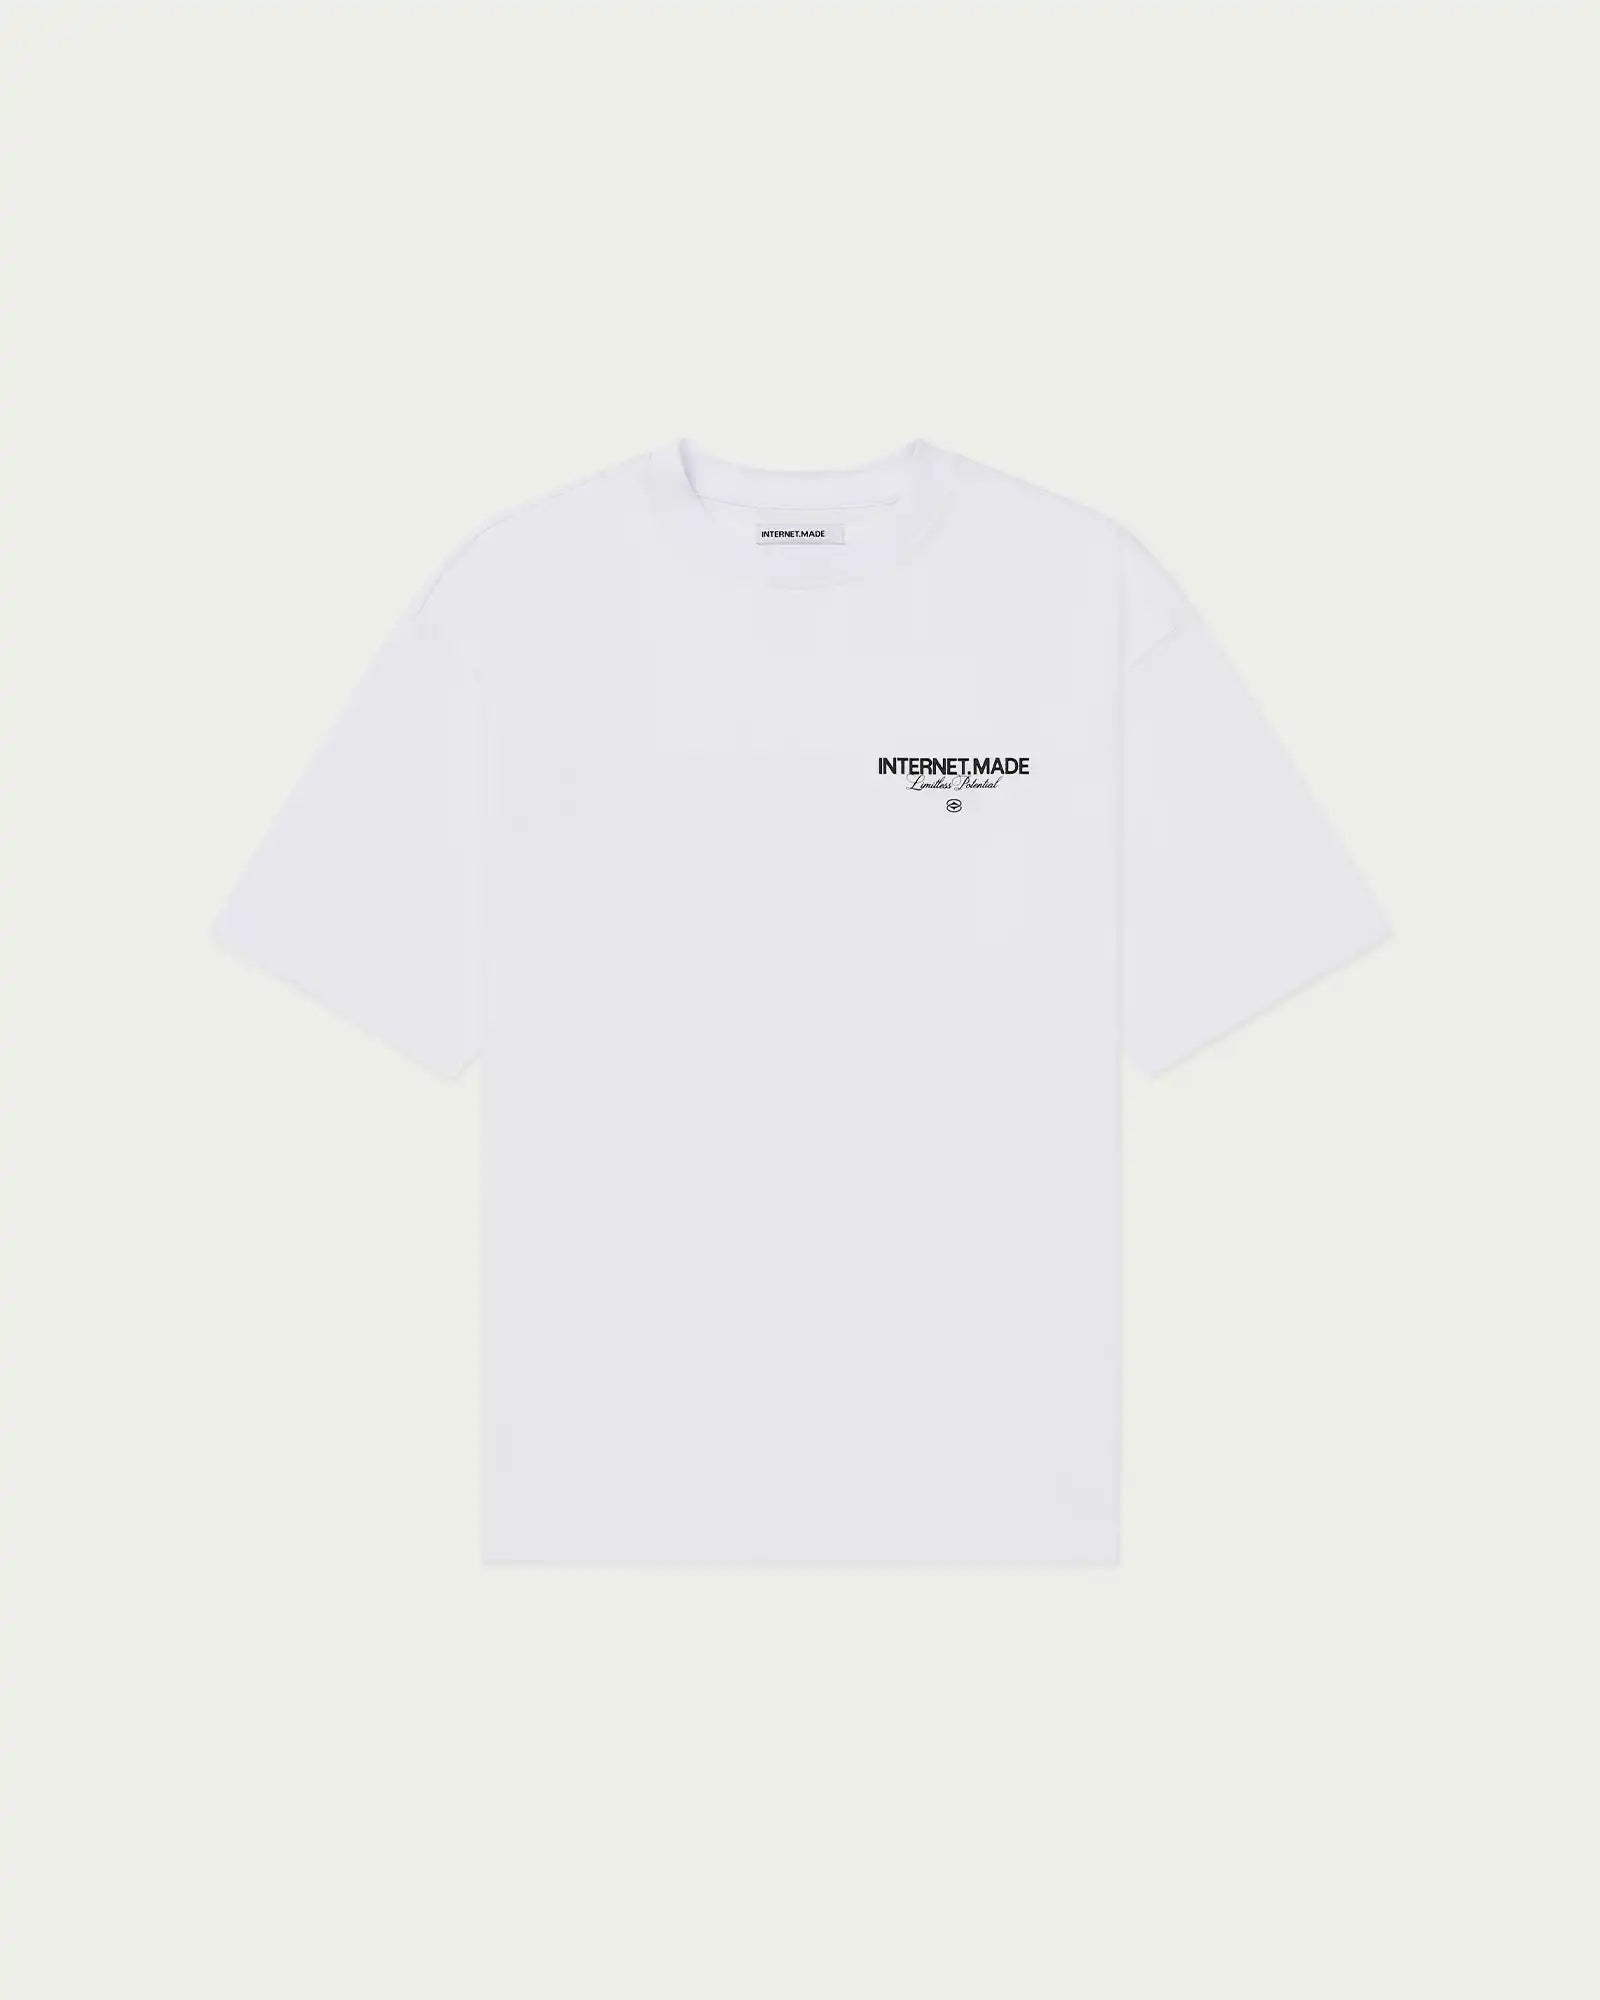 Limitless Potential T-Shirt / White